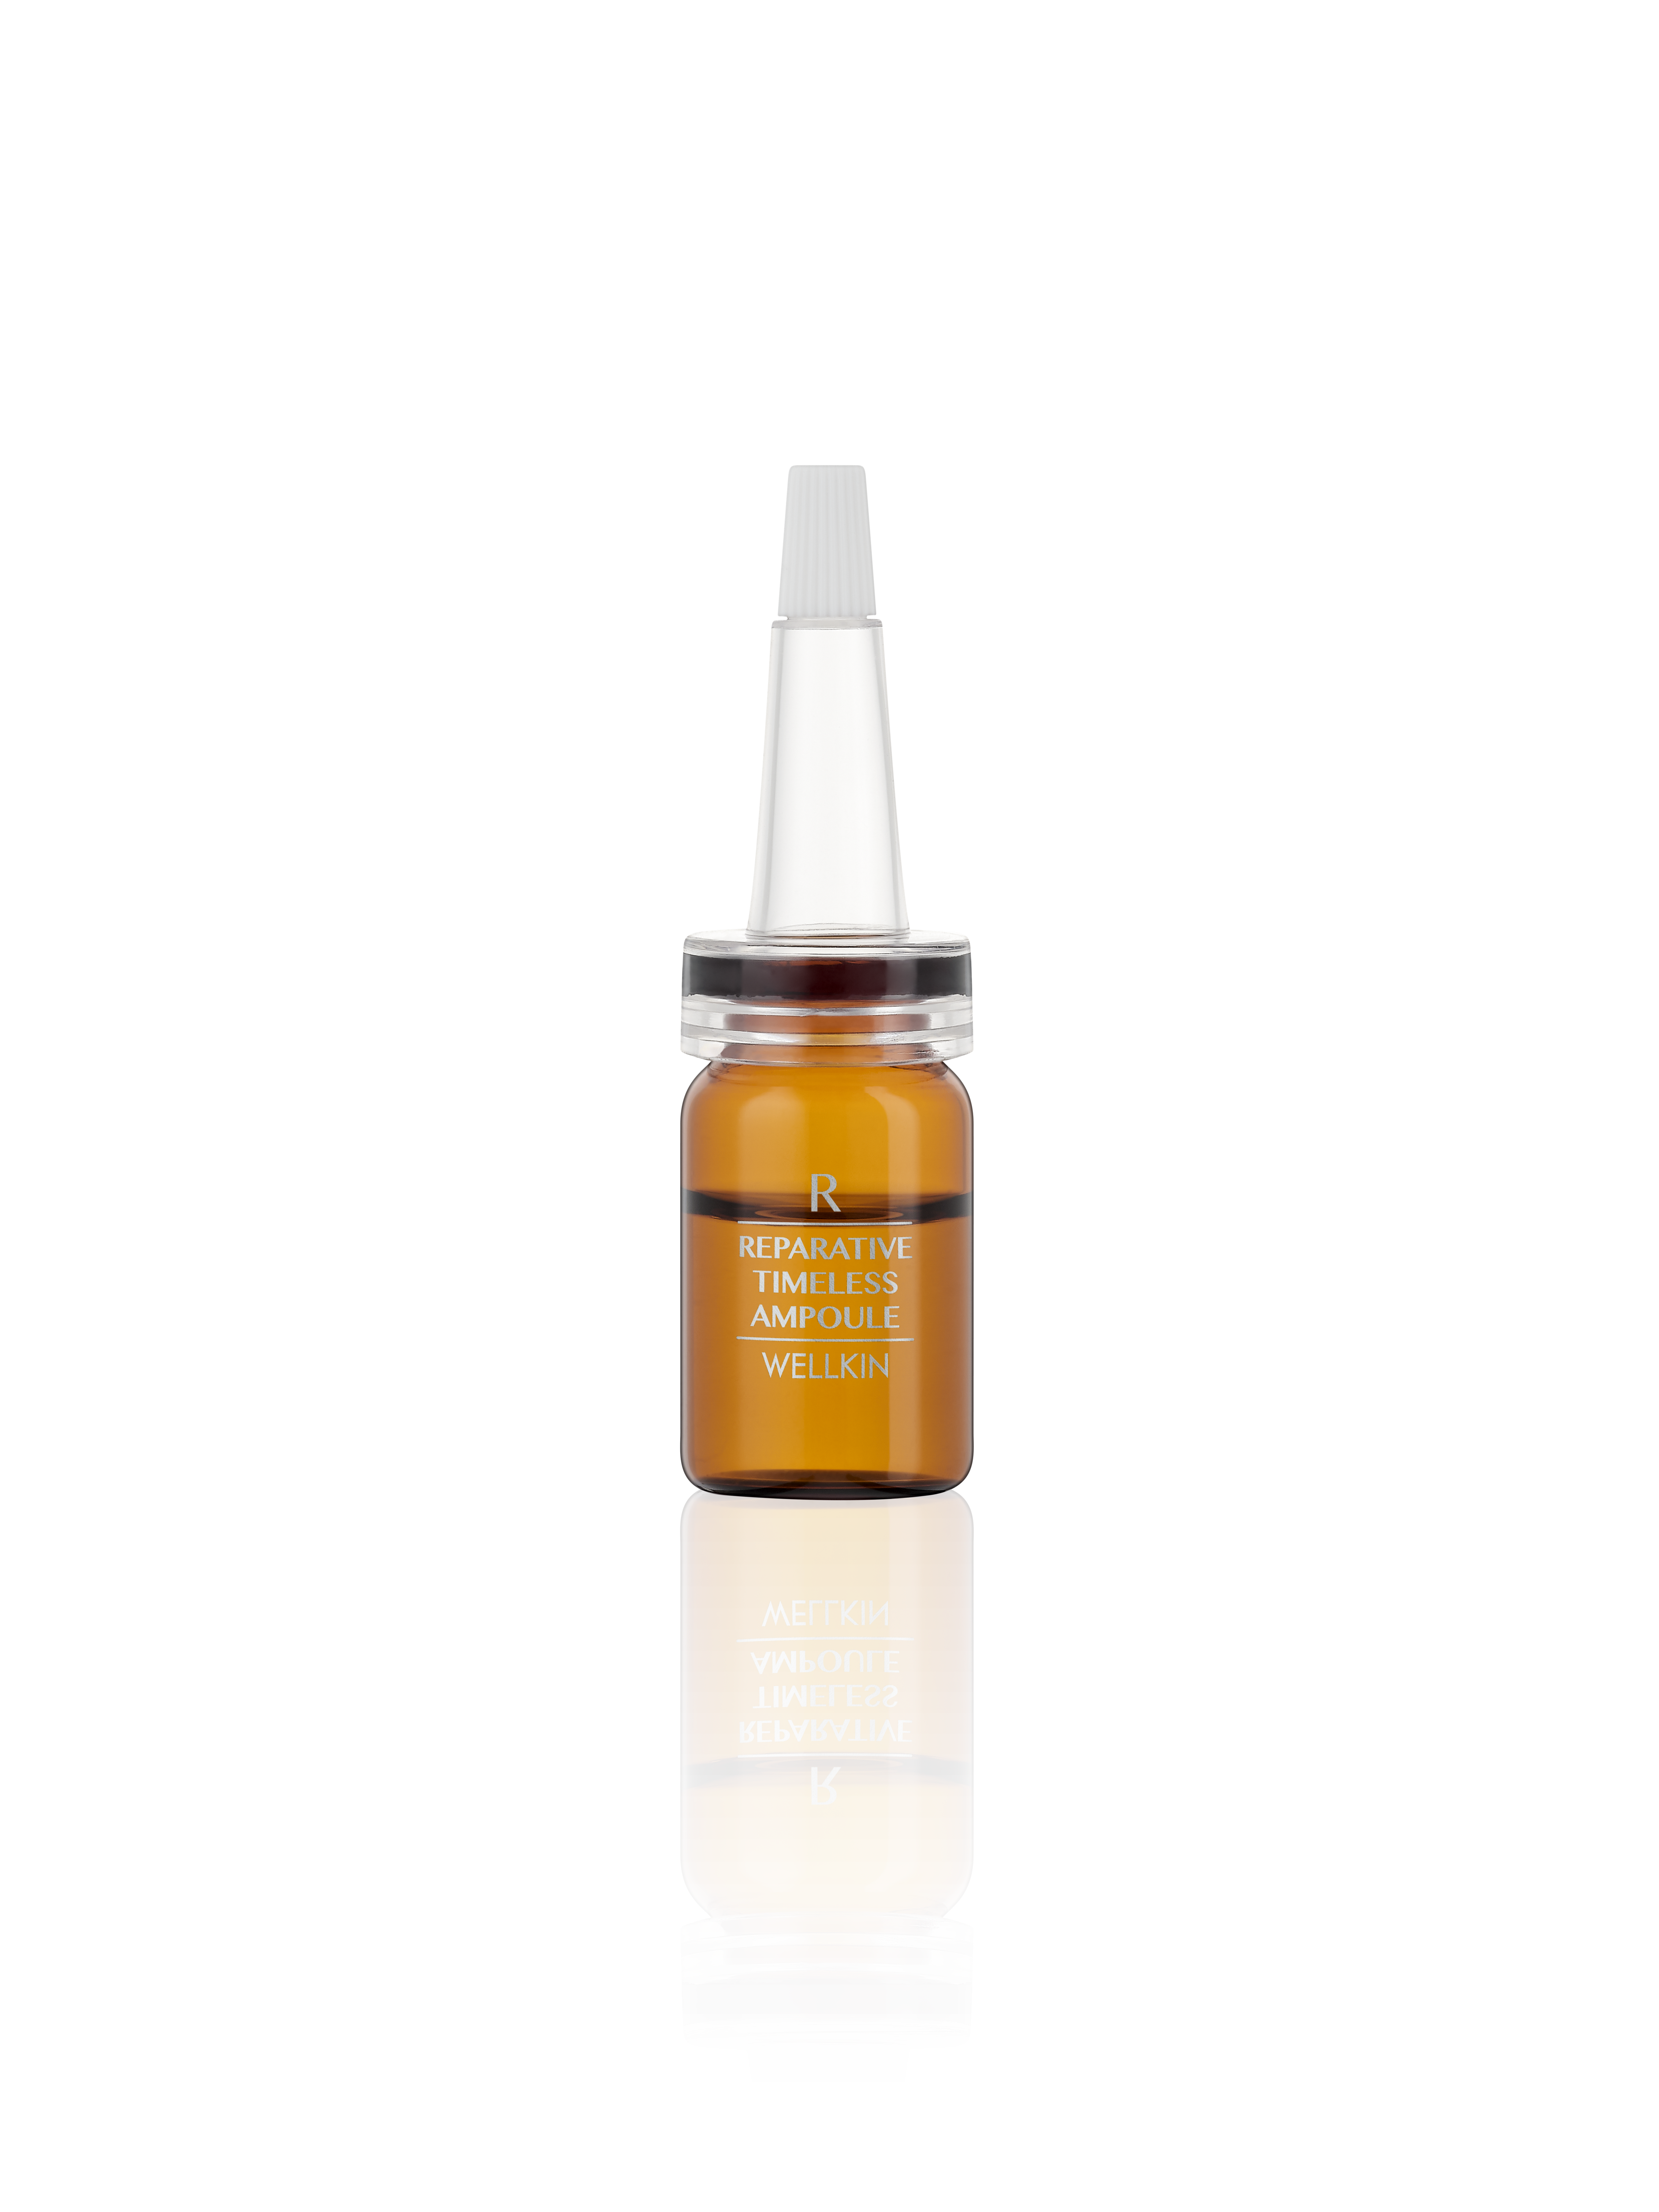 _Wellkin_ Reparative Timeless Ampoule_Hair loss and damaged scalp